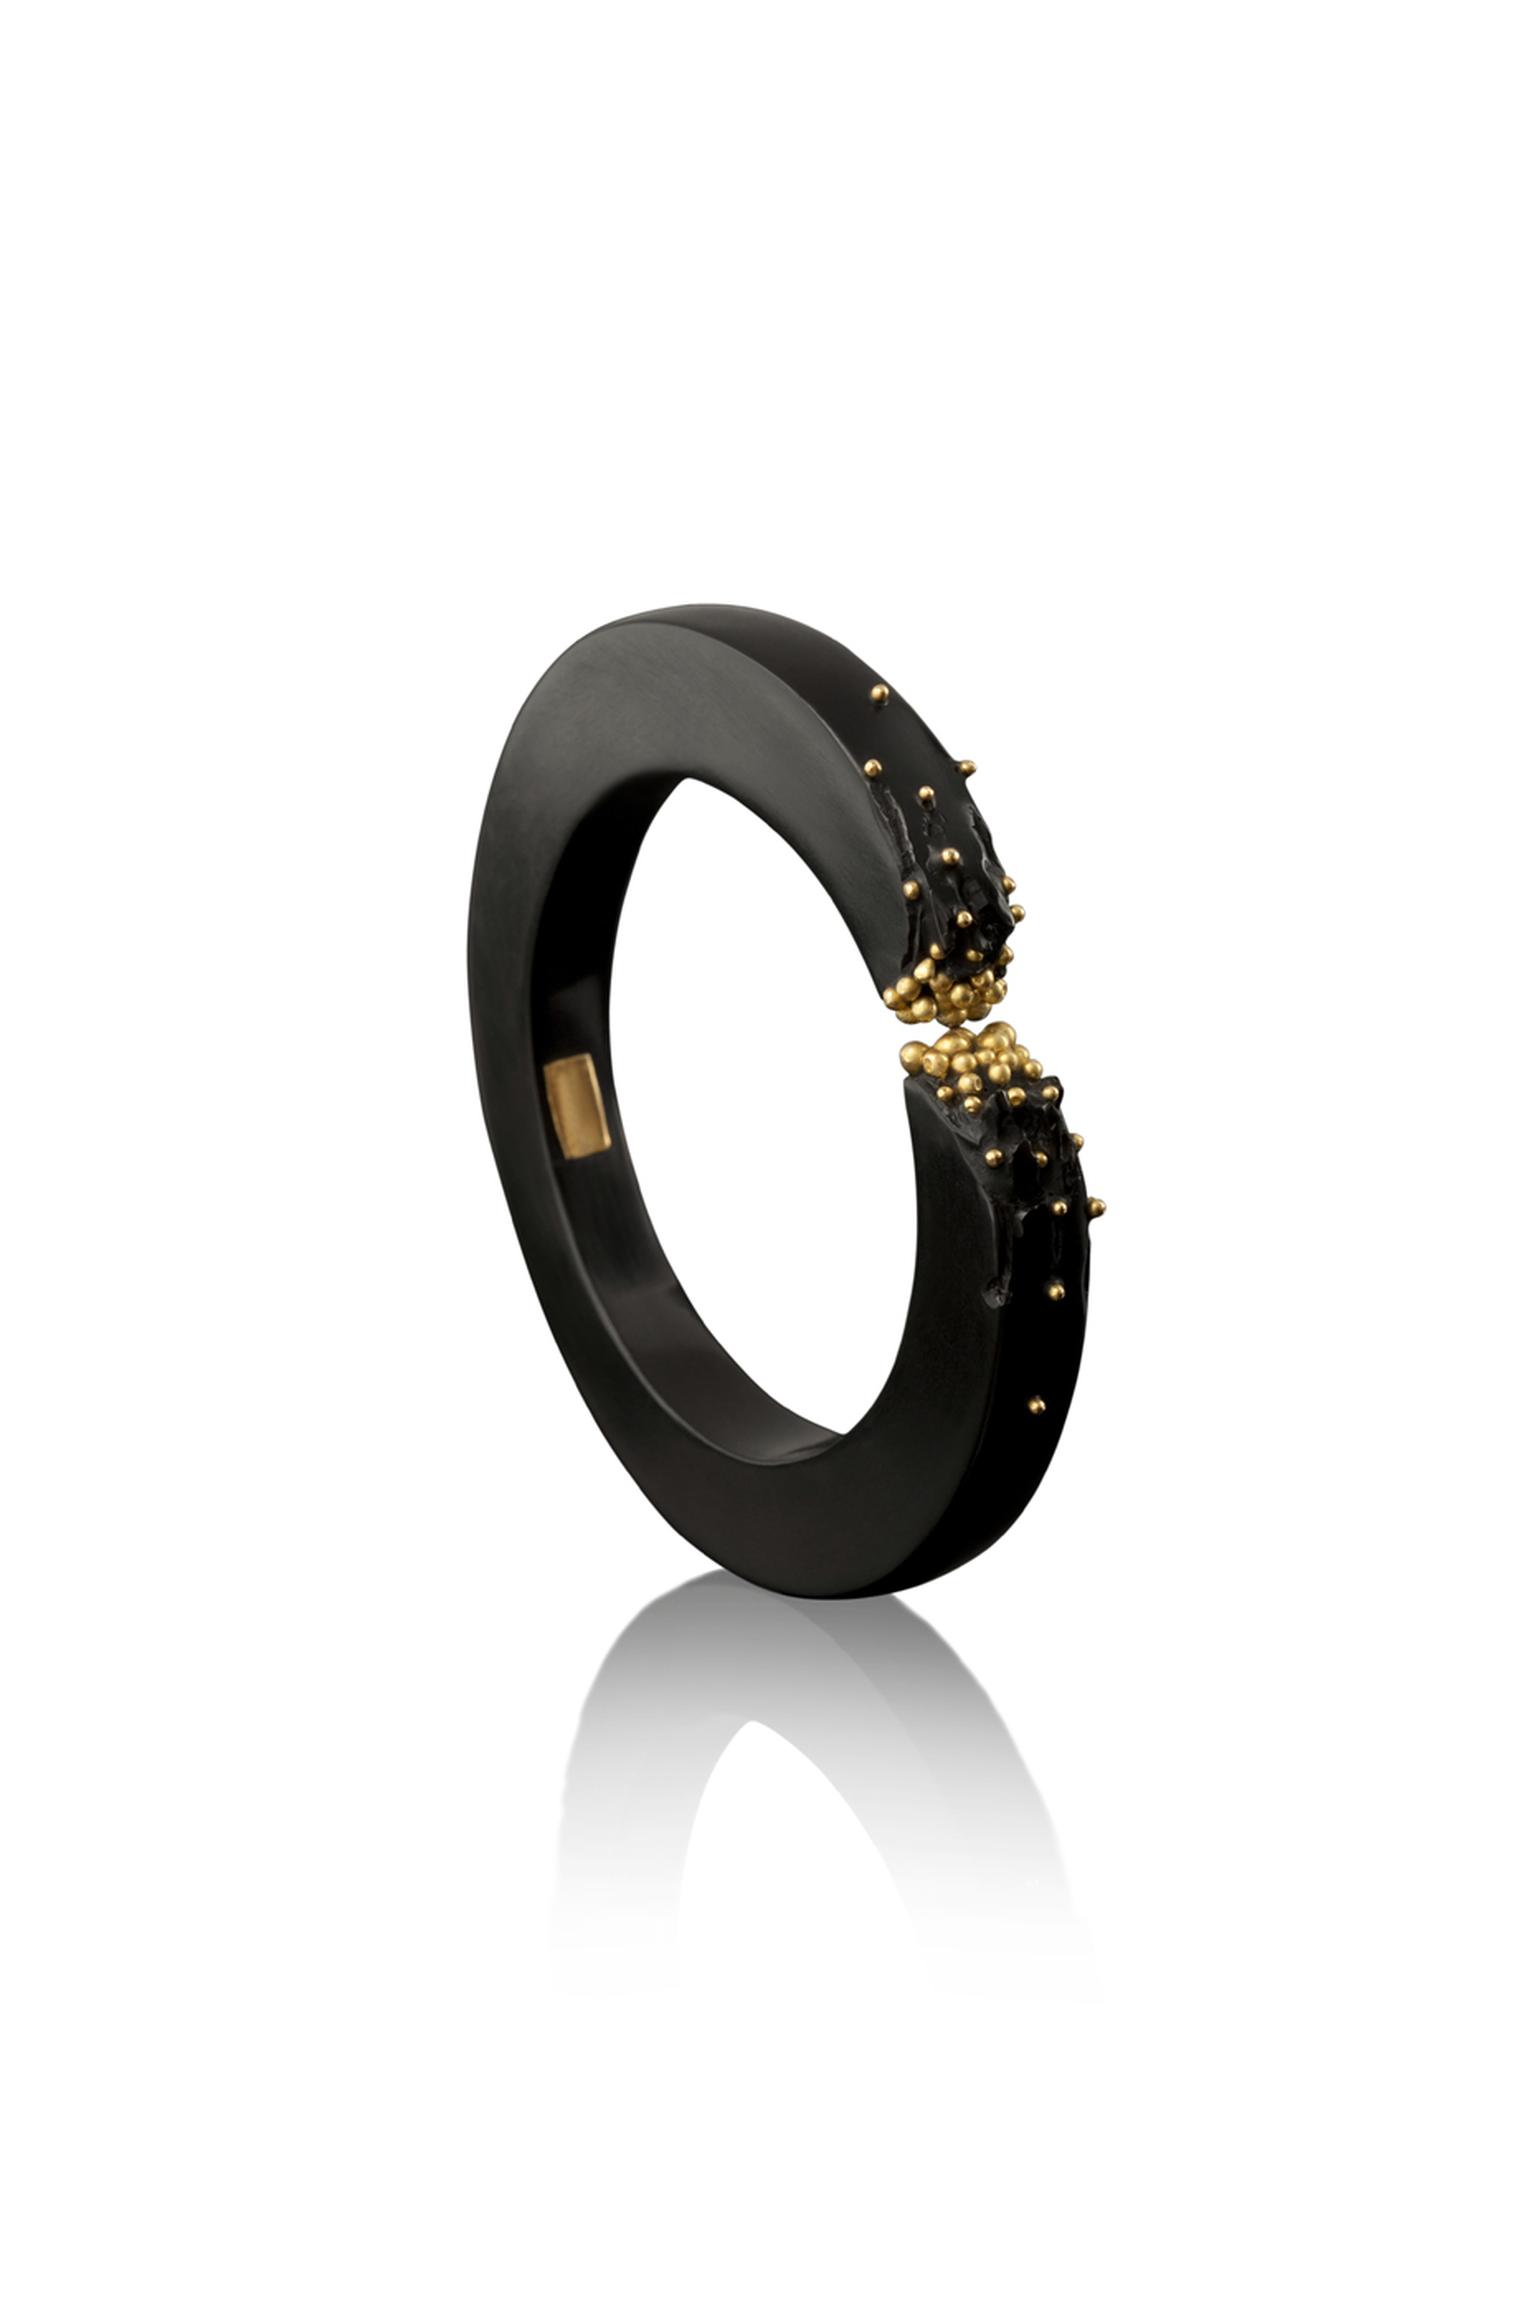 Limited-edition Jacqueline Cullen hand-carved Whitby Jet gold granulated bangle.